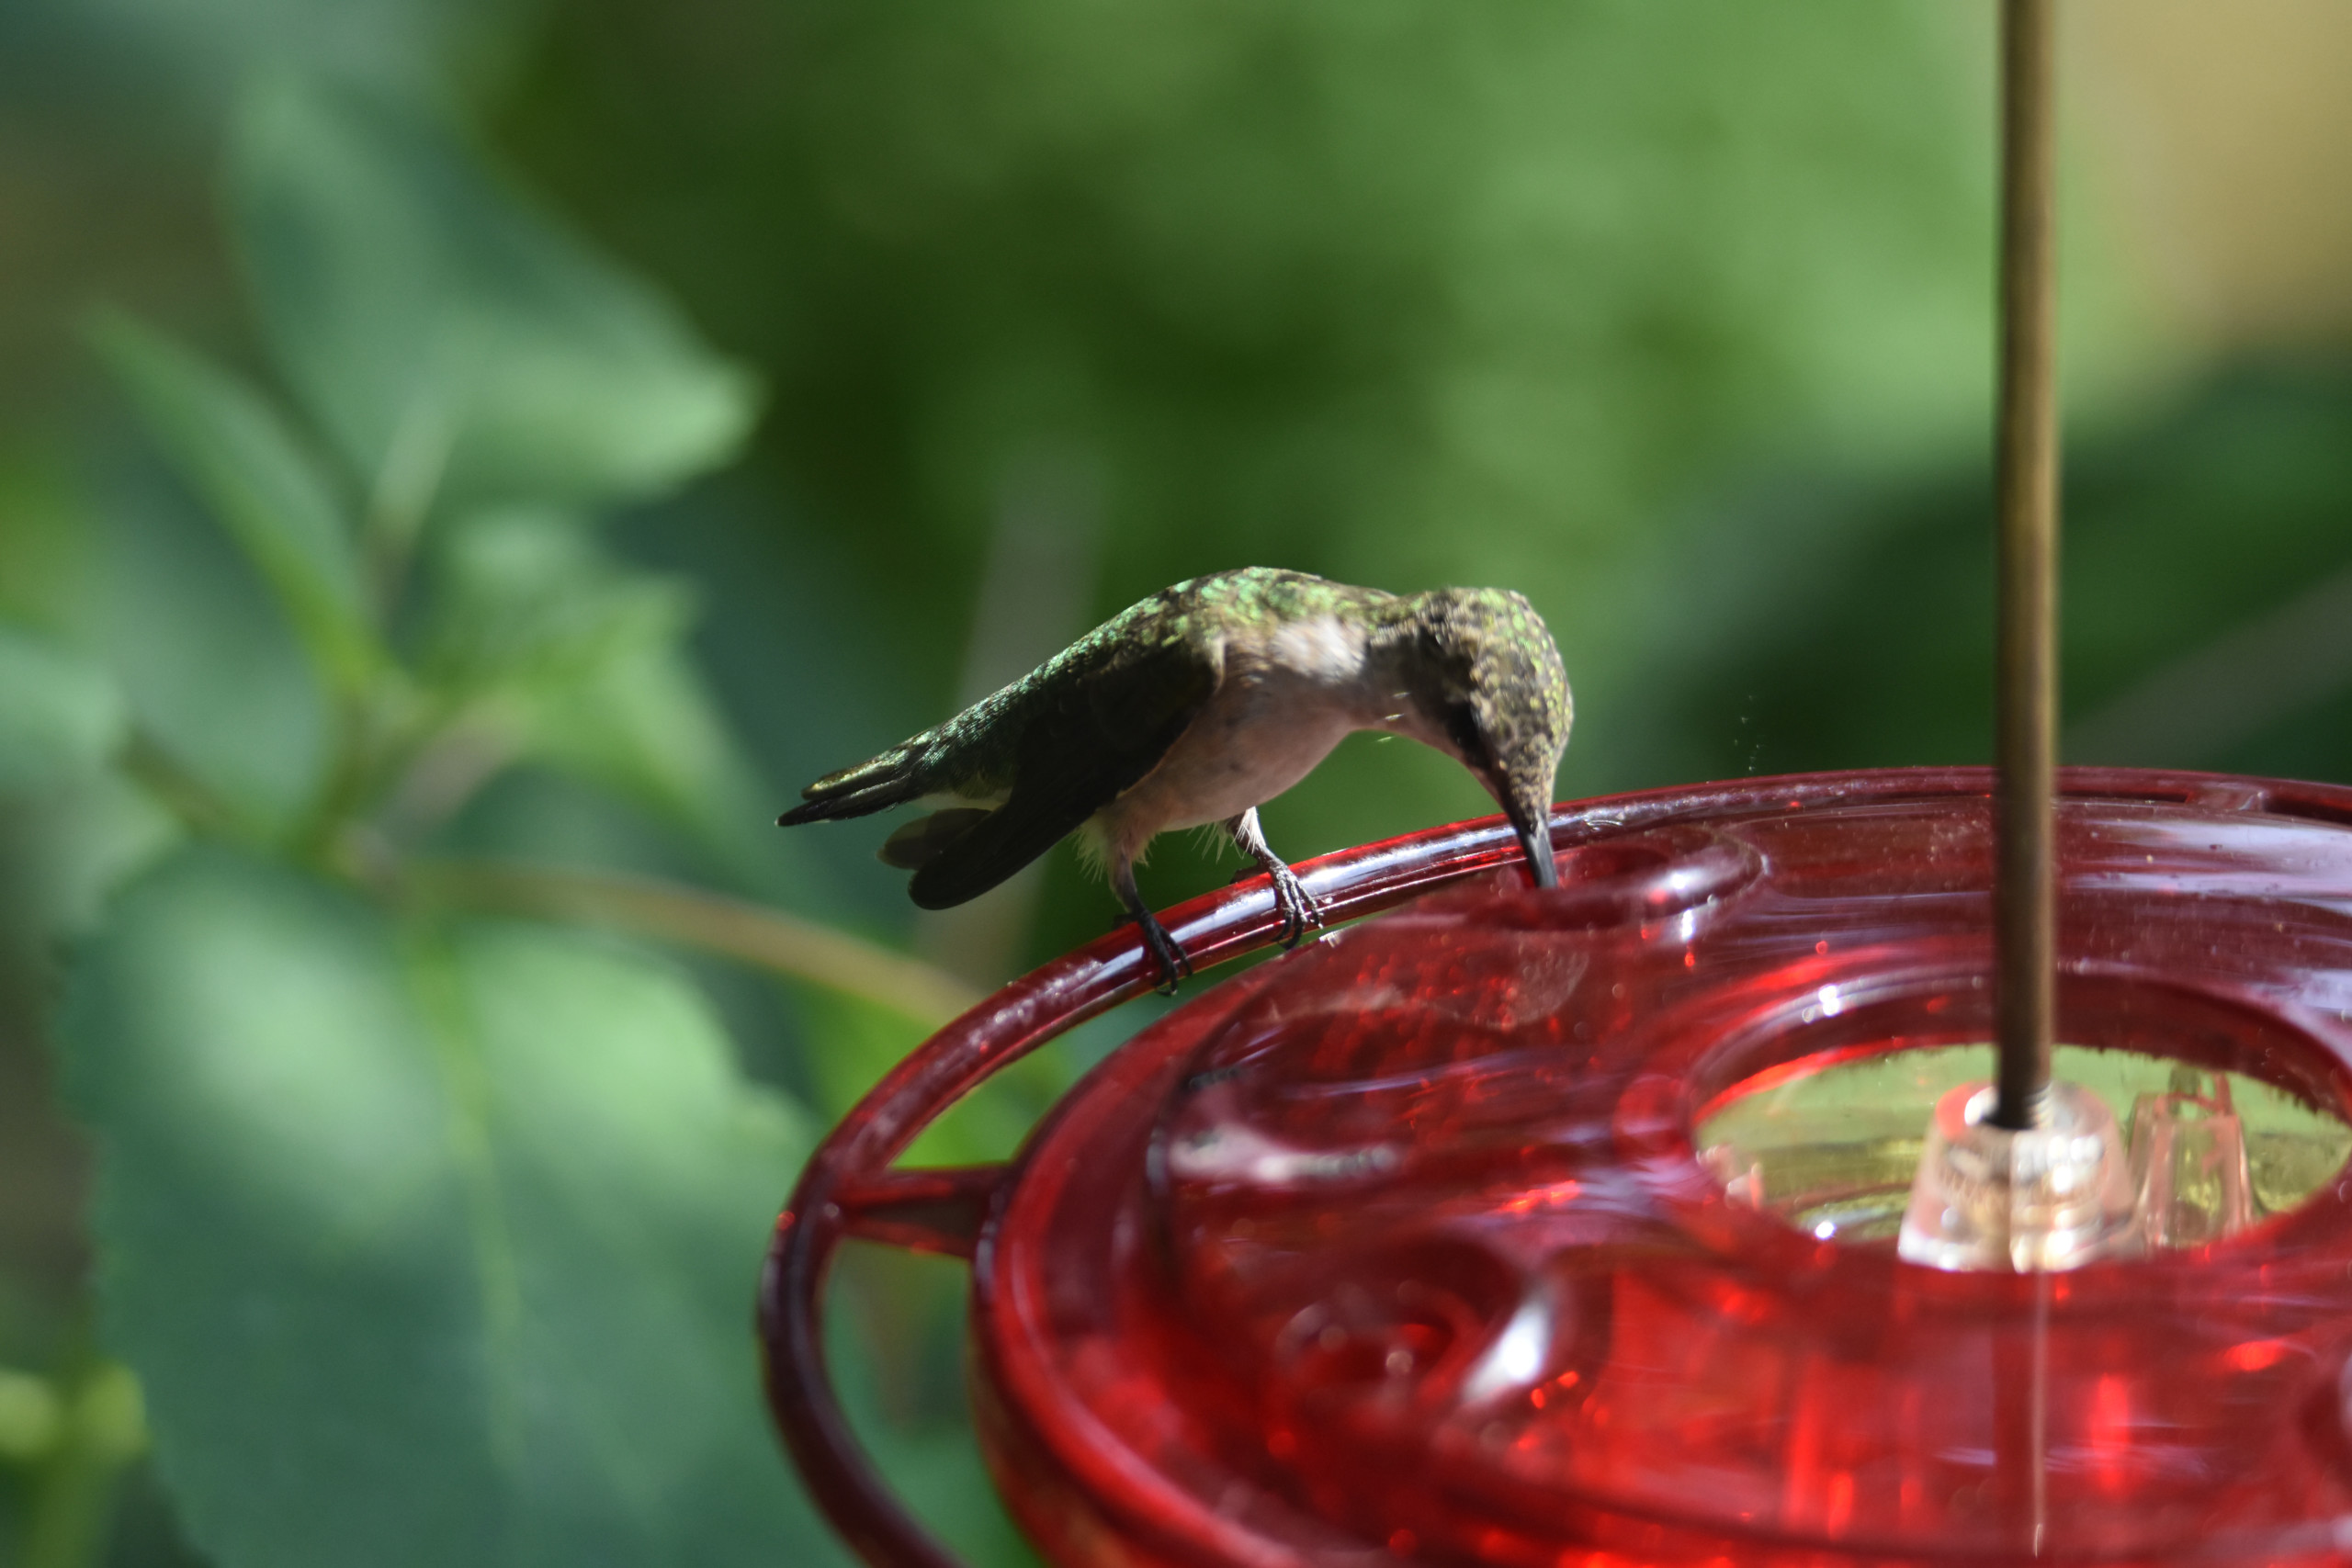 Hummingbird sipping nectar from a feeder